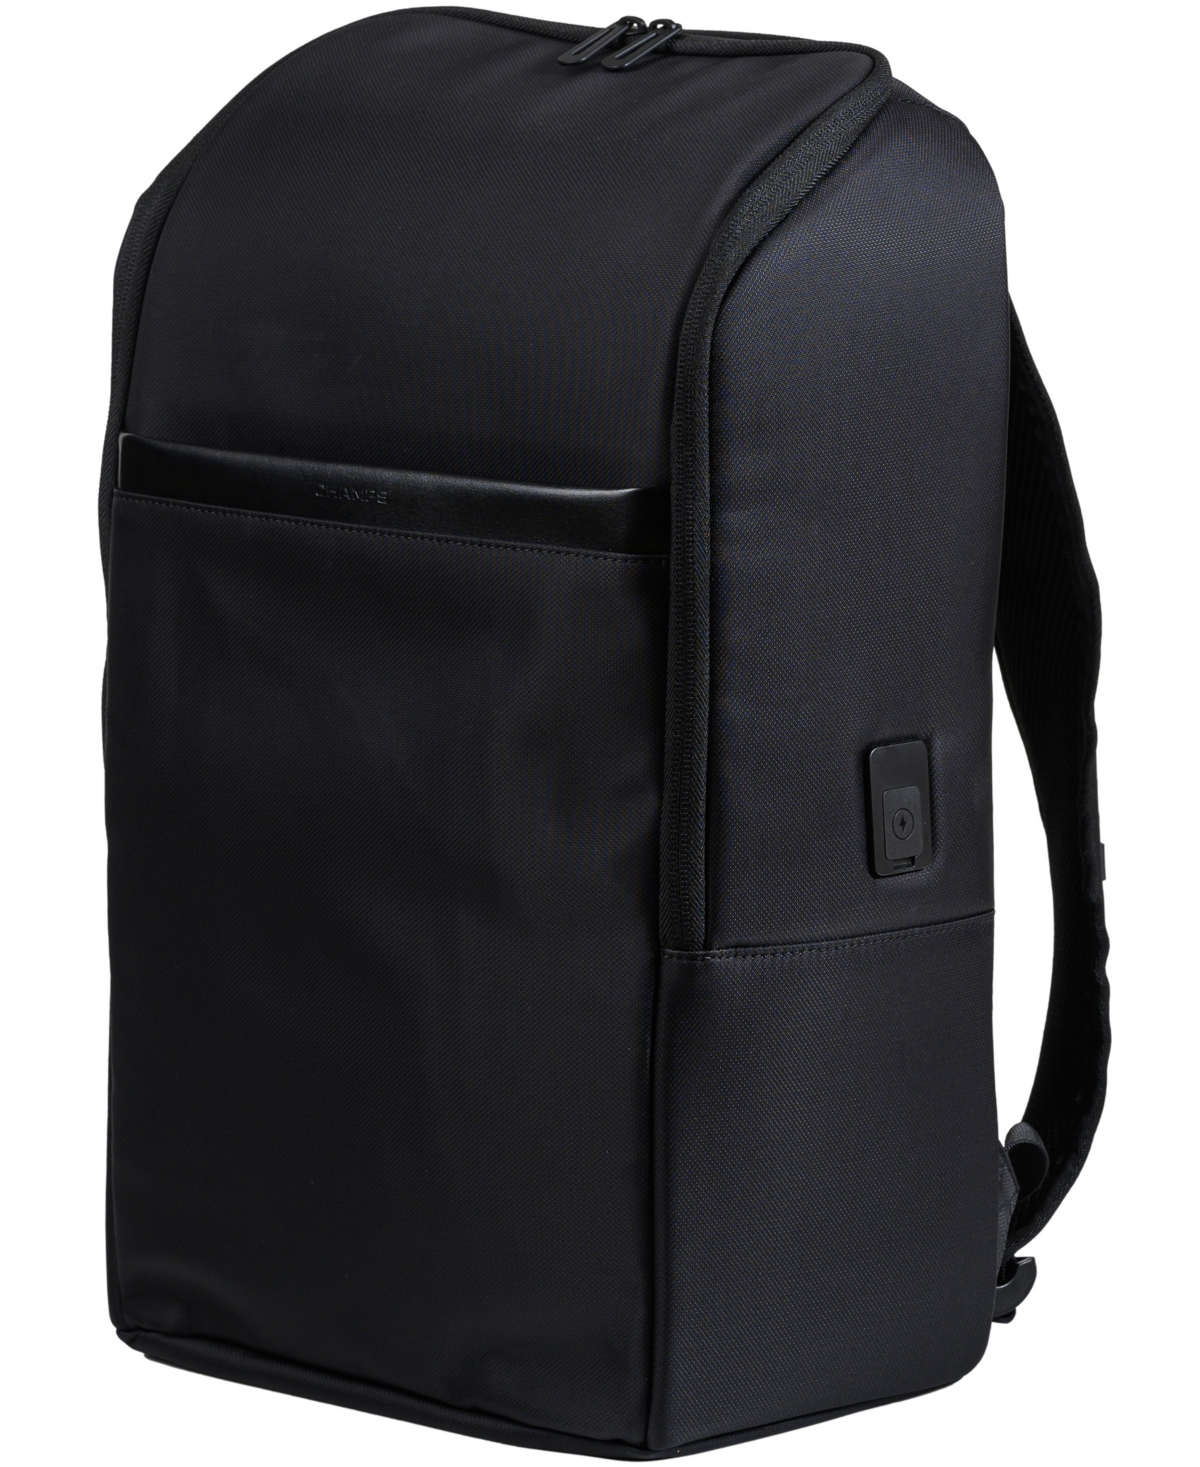 Onyx Collection - Tech Backpack with Usb Port - Black